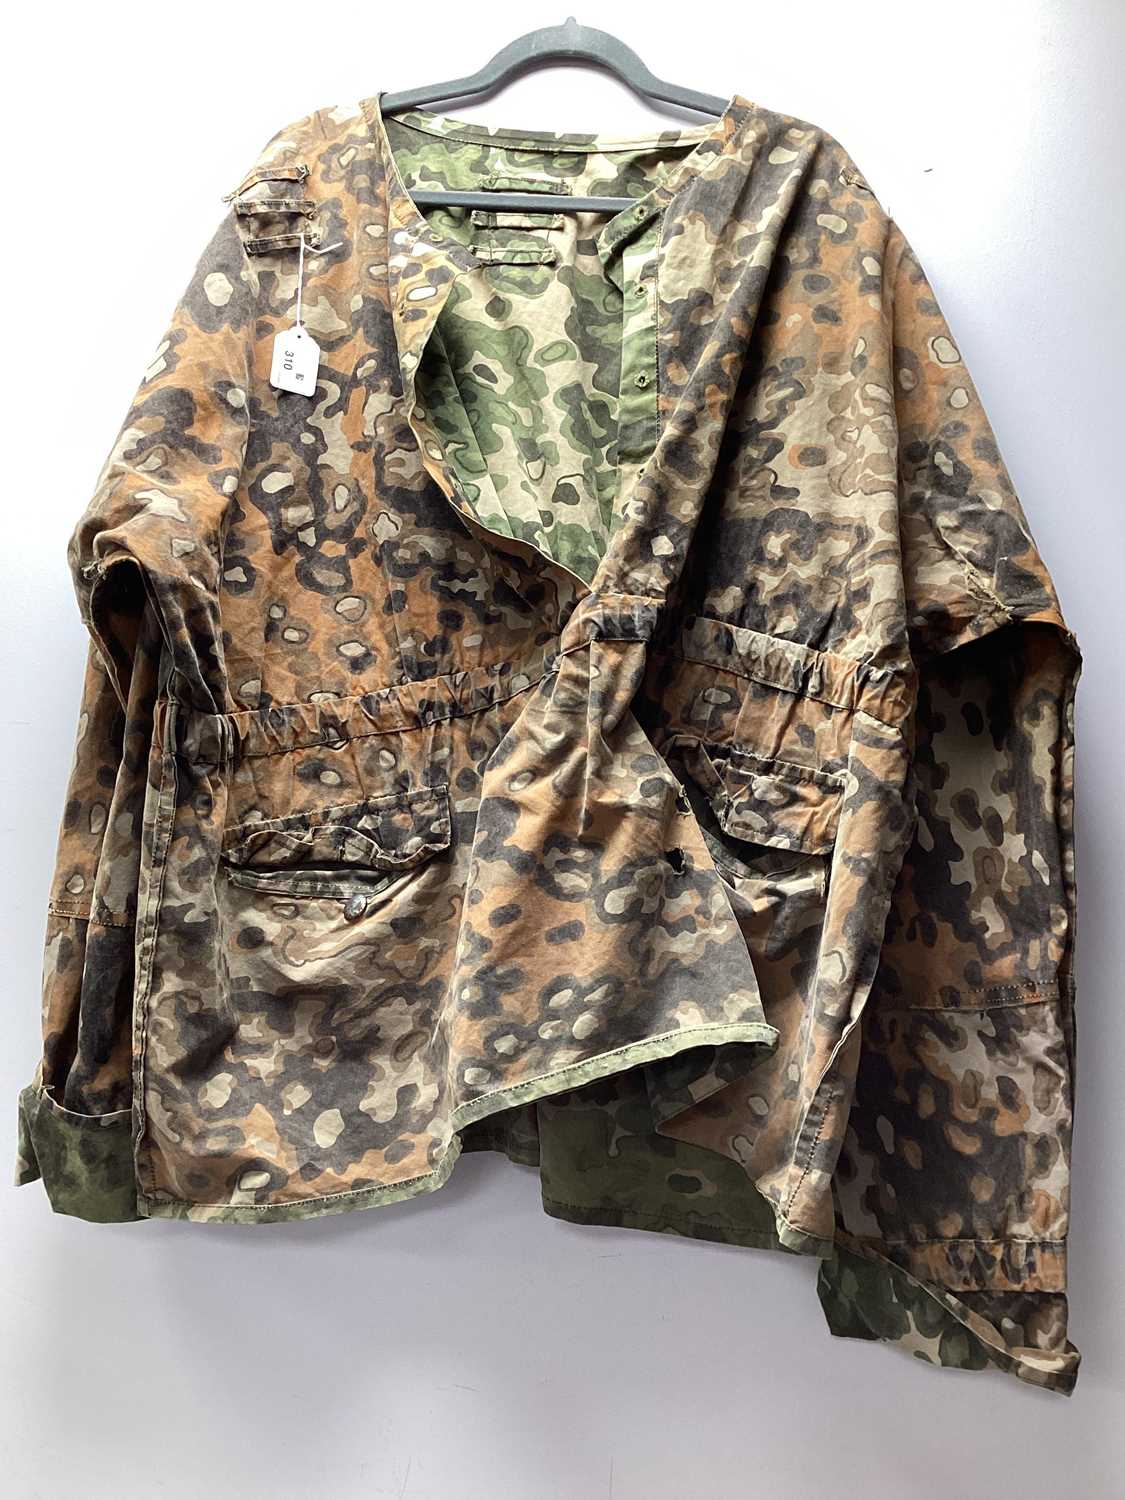 WWII Third Reich German Waffen SS Style Camouflage Smock. Due to the nature of these items we